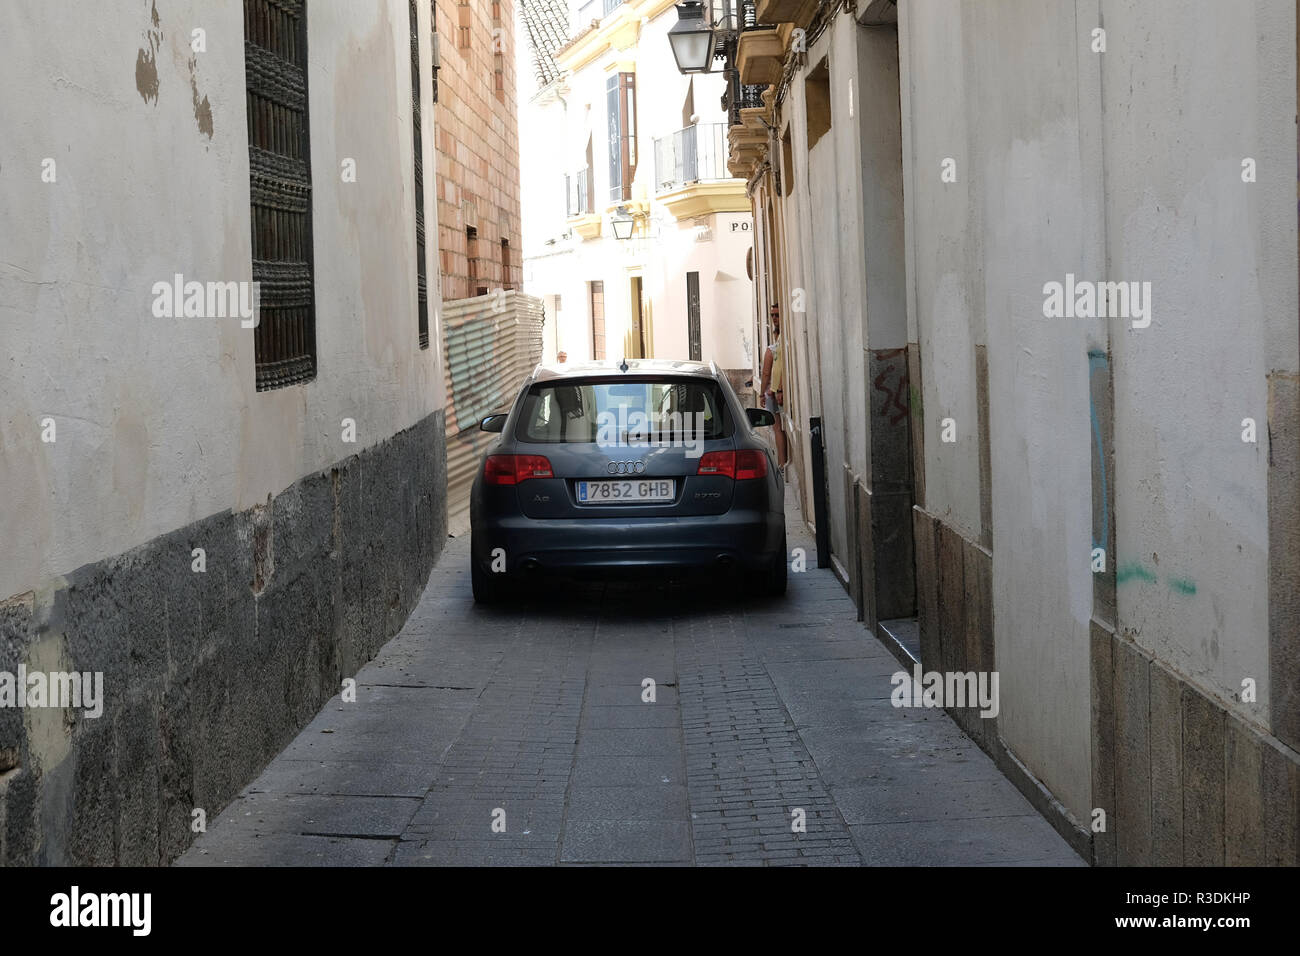 A car squeezes down a narrow street in Spain Stock Photo